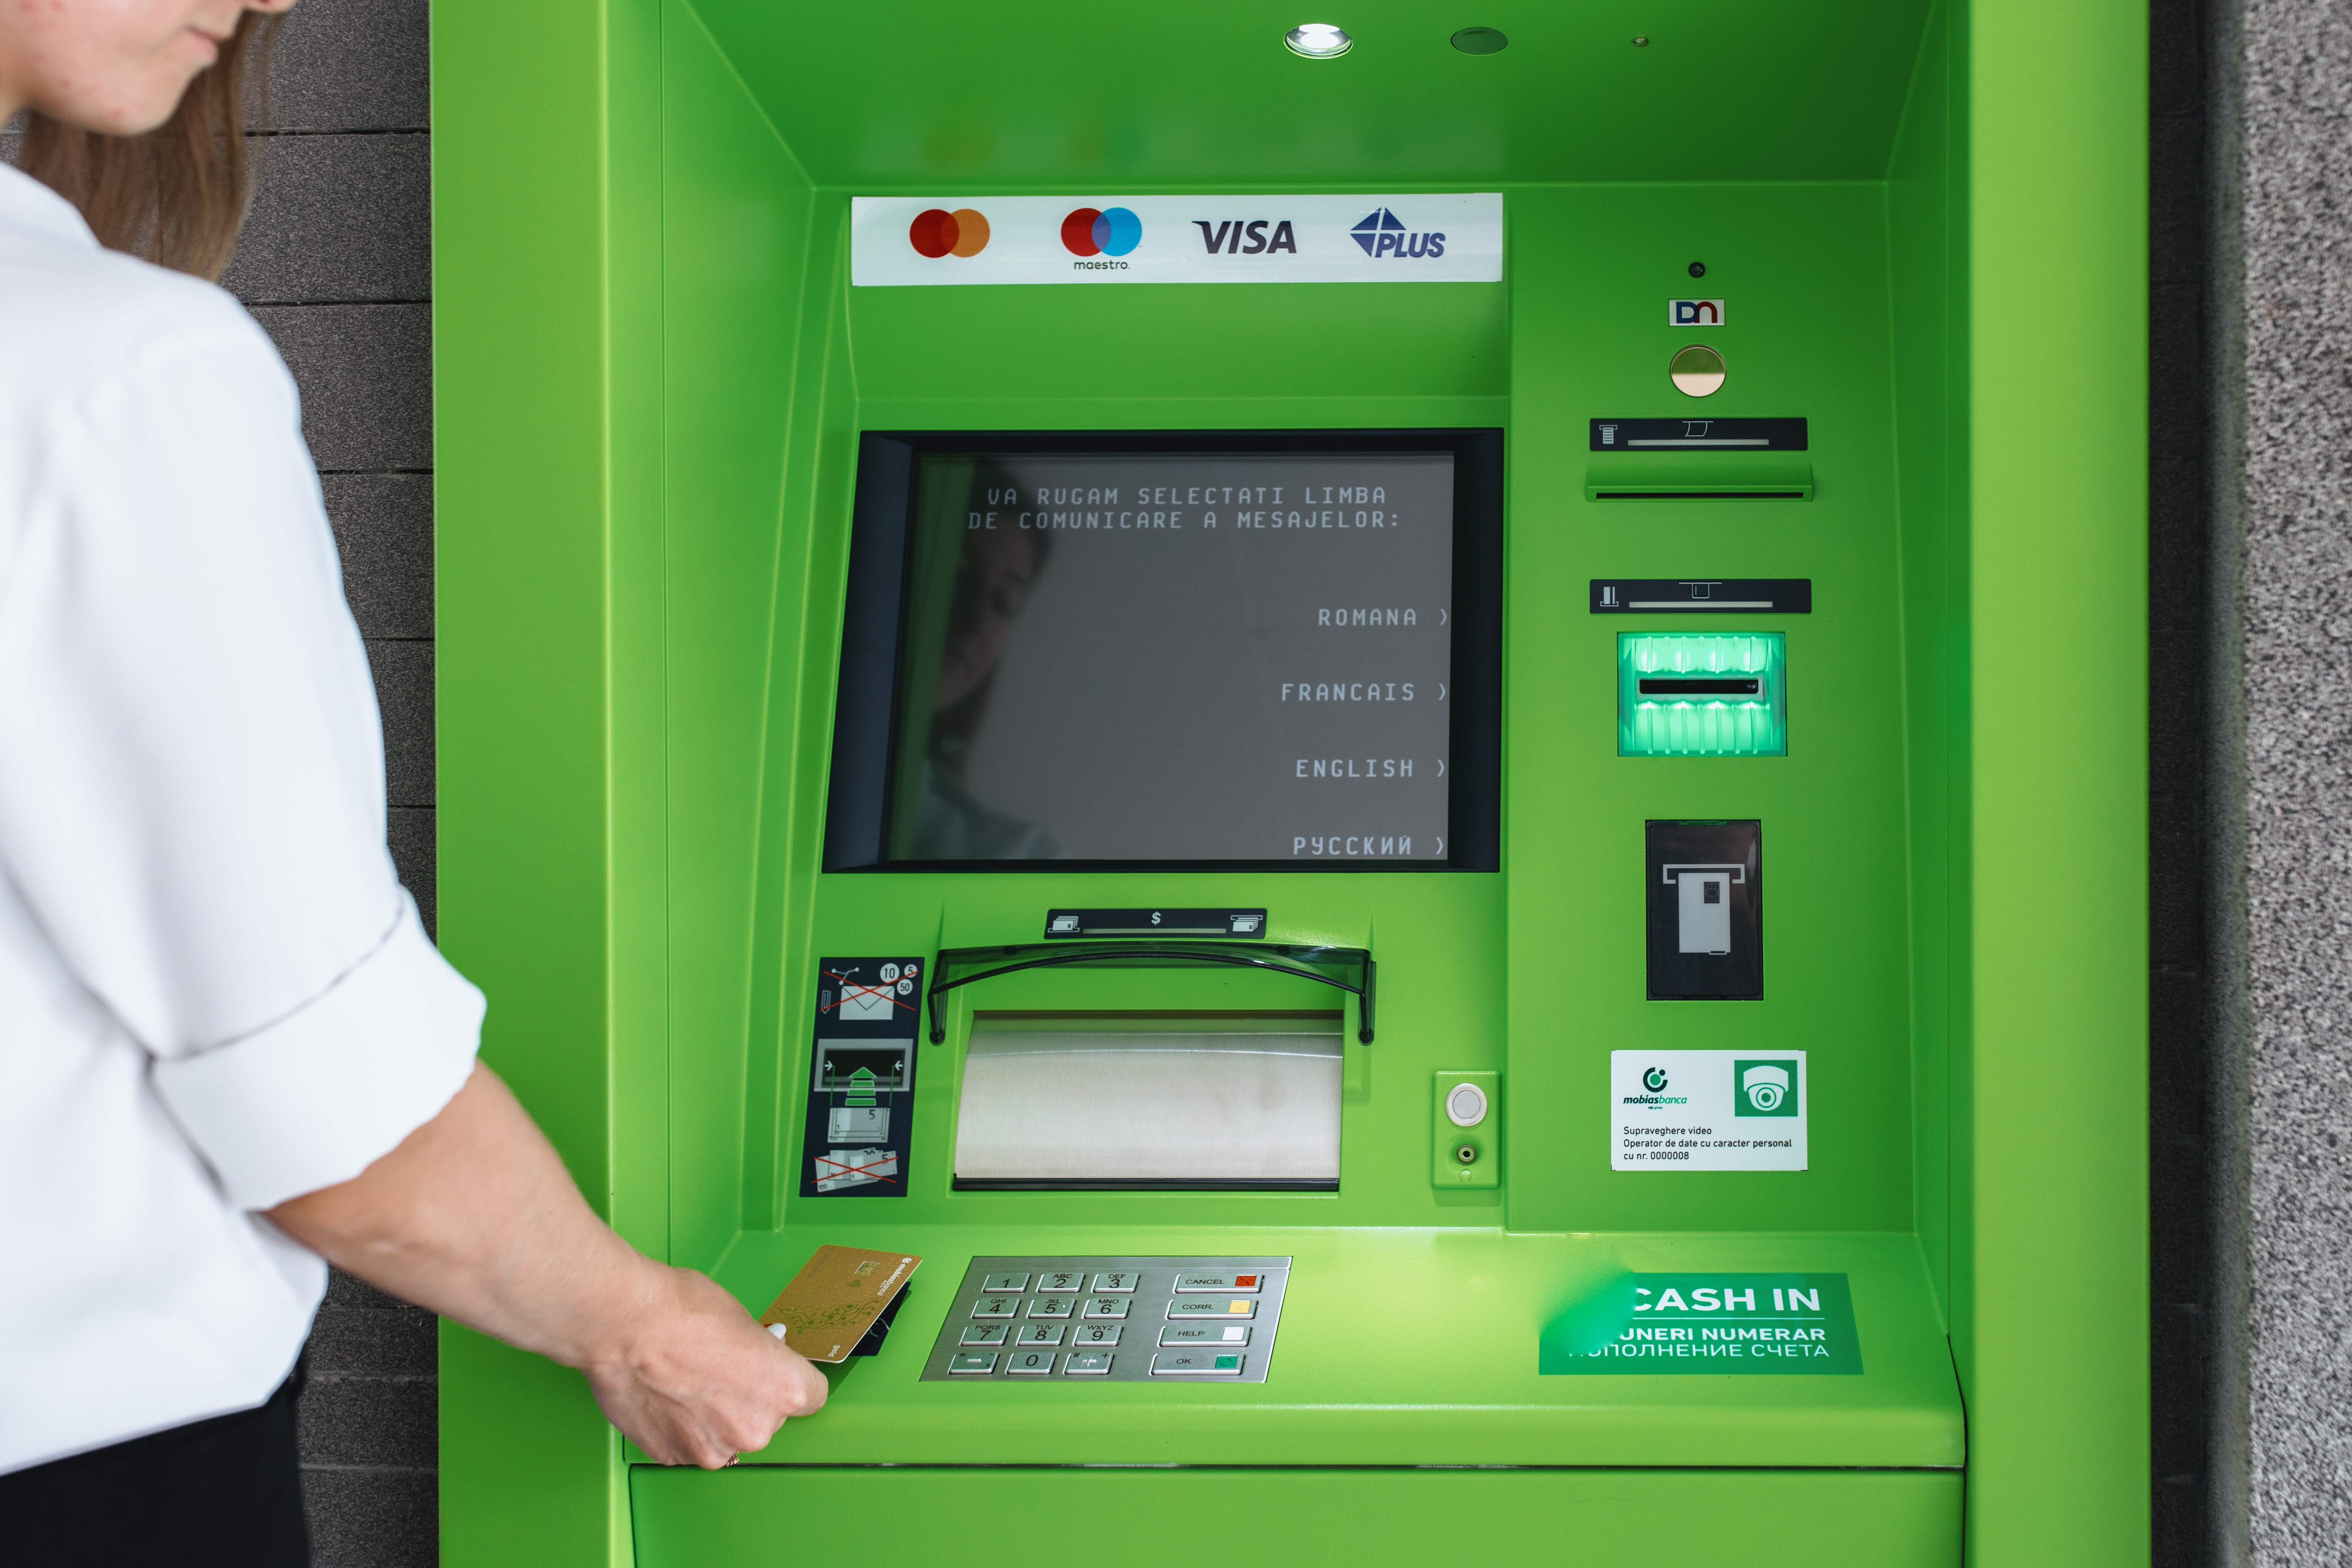 OTP Bank is transitioning to the next generation of ATMs